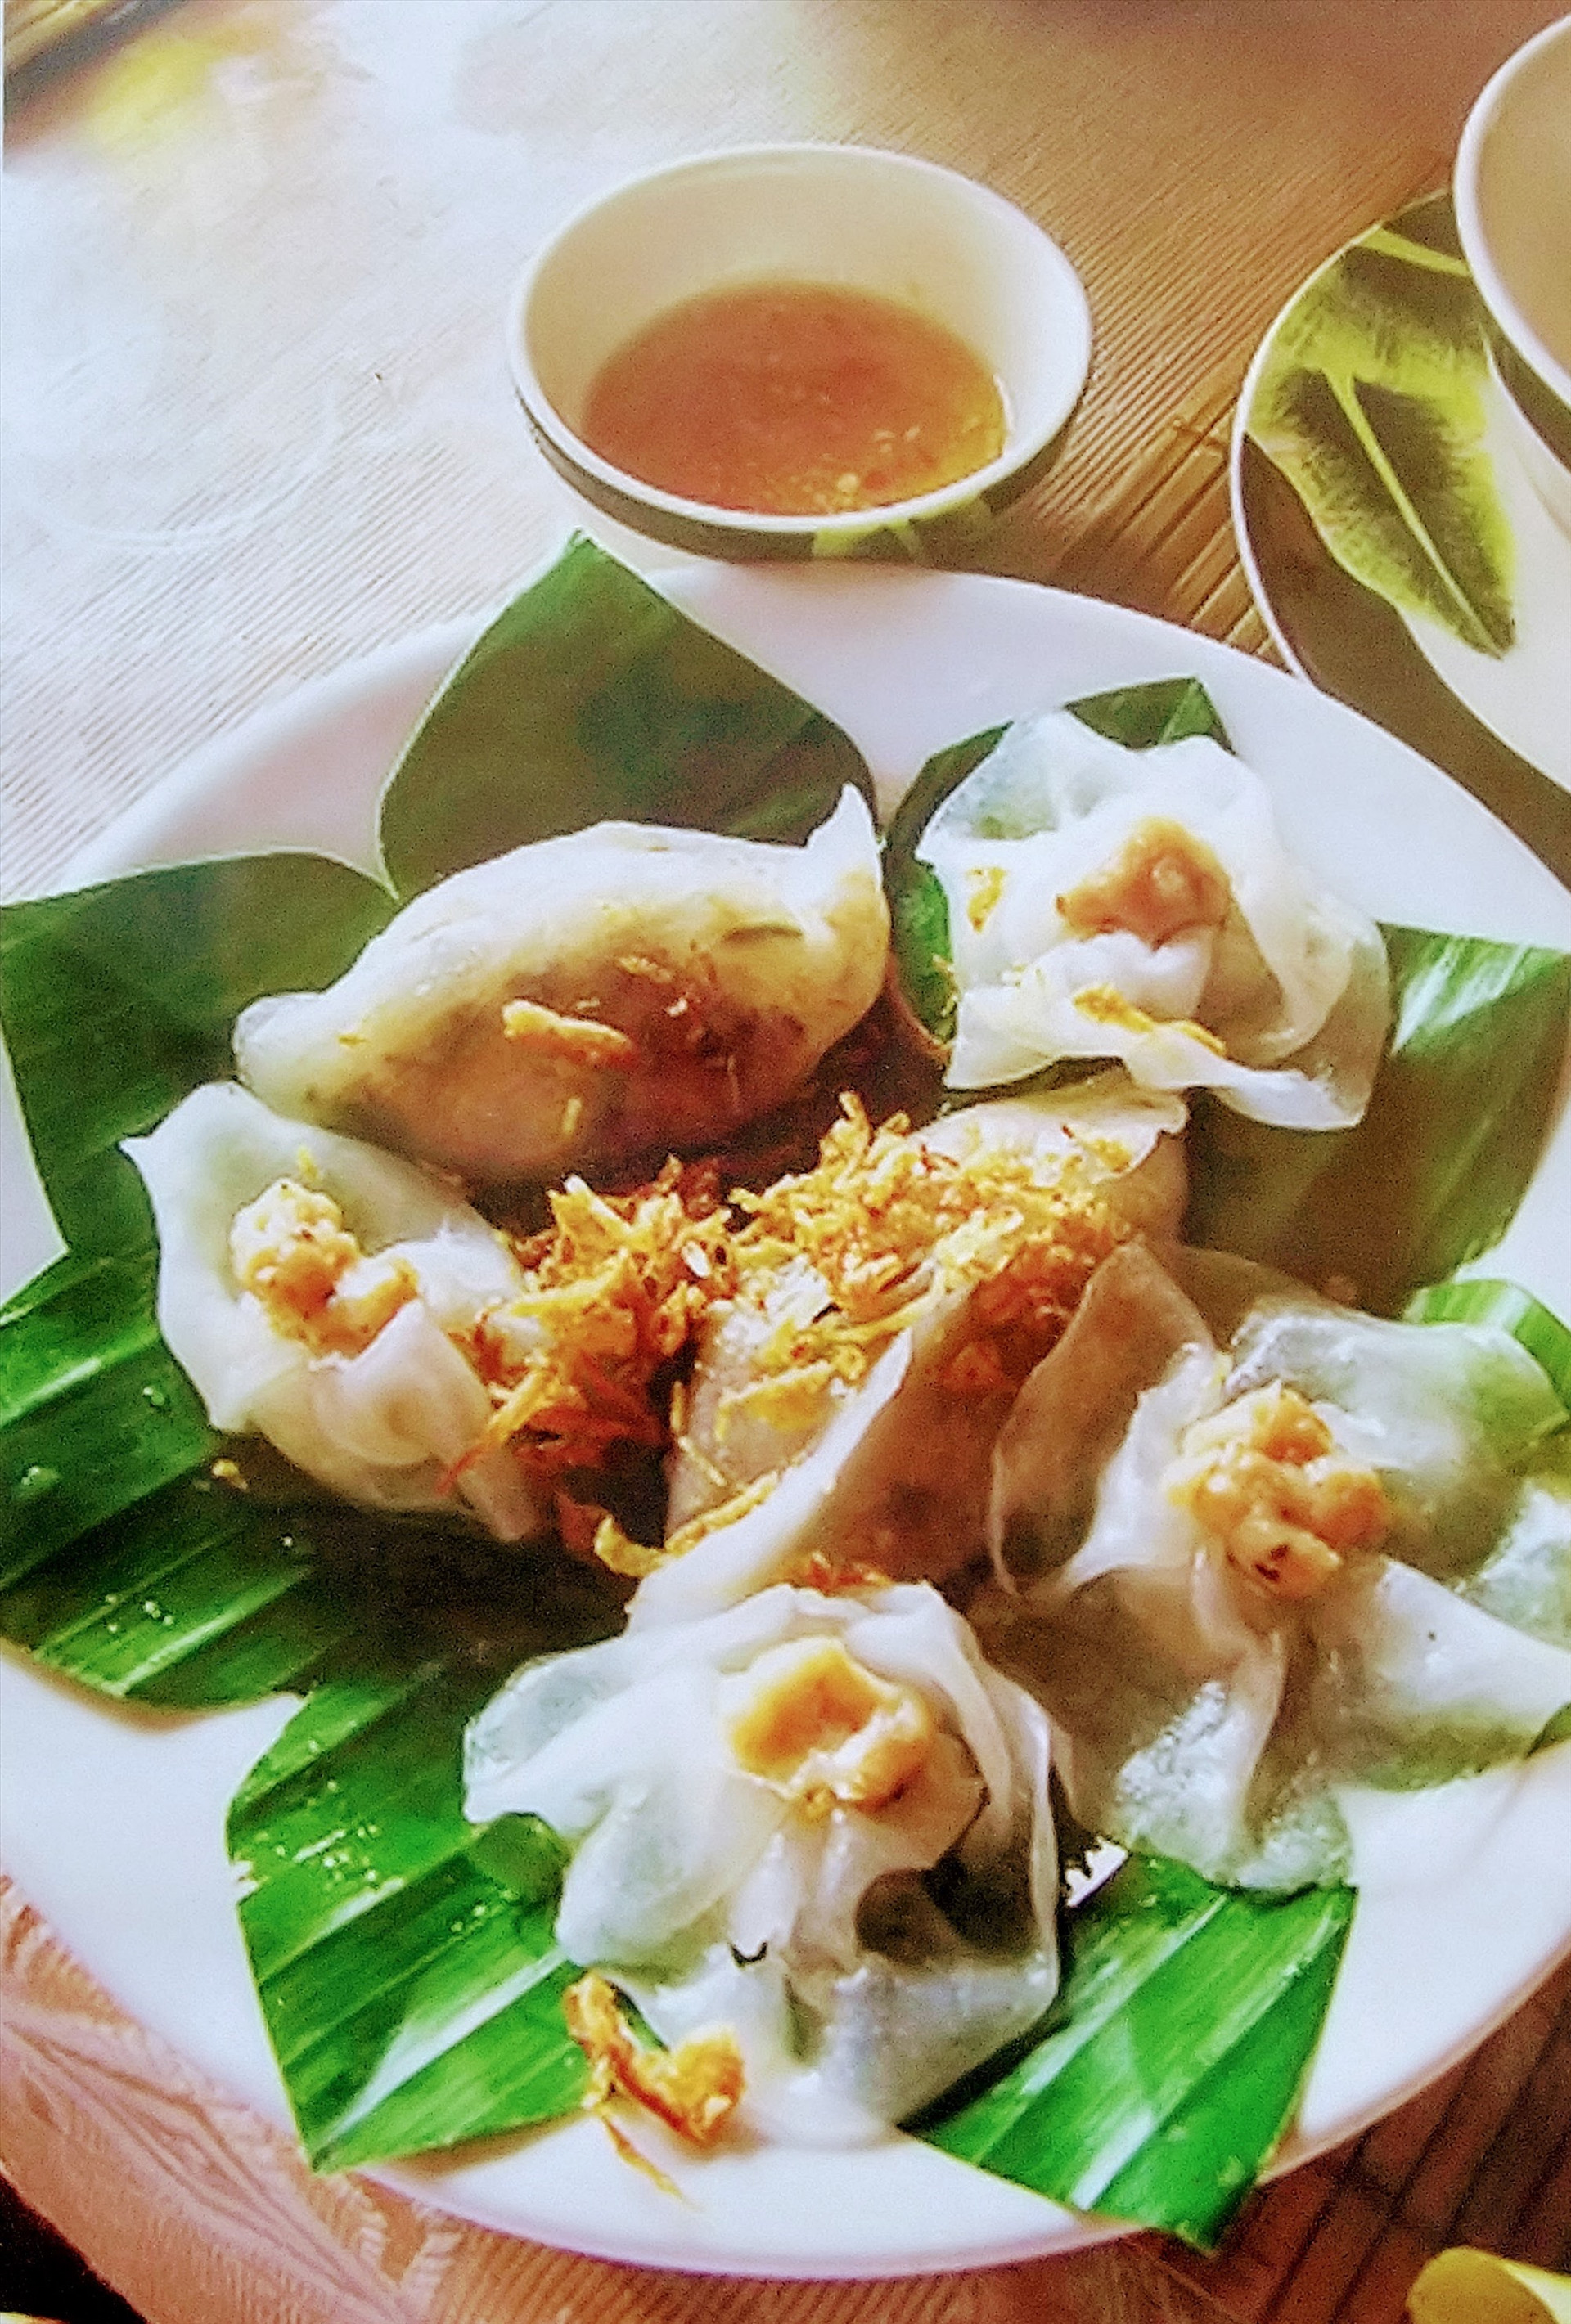 These translucent rice paper pouches of joy, filled with pork or shrimp, and lightly steamed to create a crimped edge, are a regional speciality. While sold in restaurants all over Hoi An, white rose dumplings (banh bao banh vac) – named because they look like roses – are sourced from one place: the White Rose Restaurant.